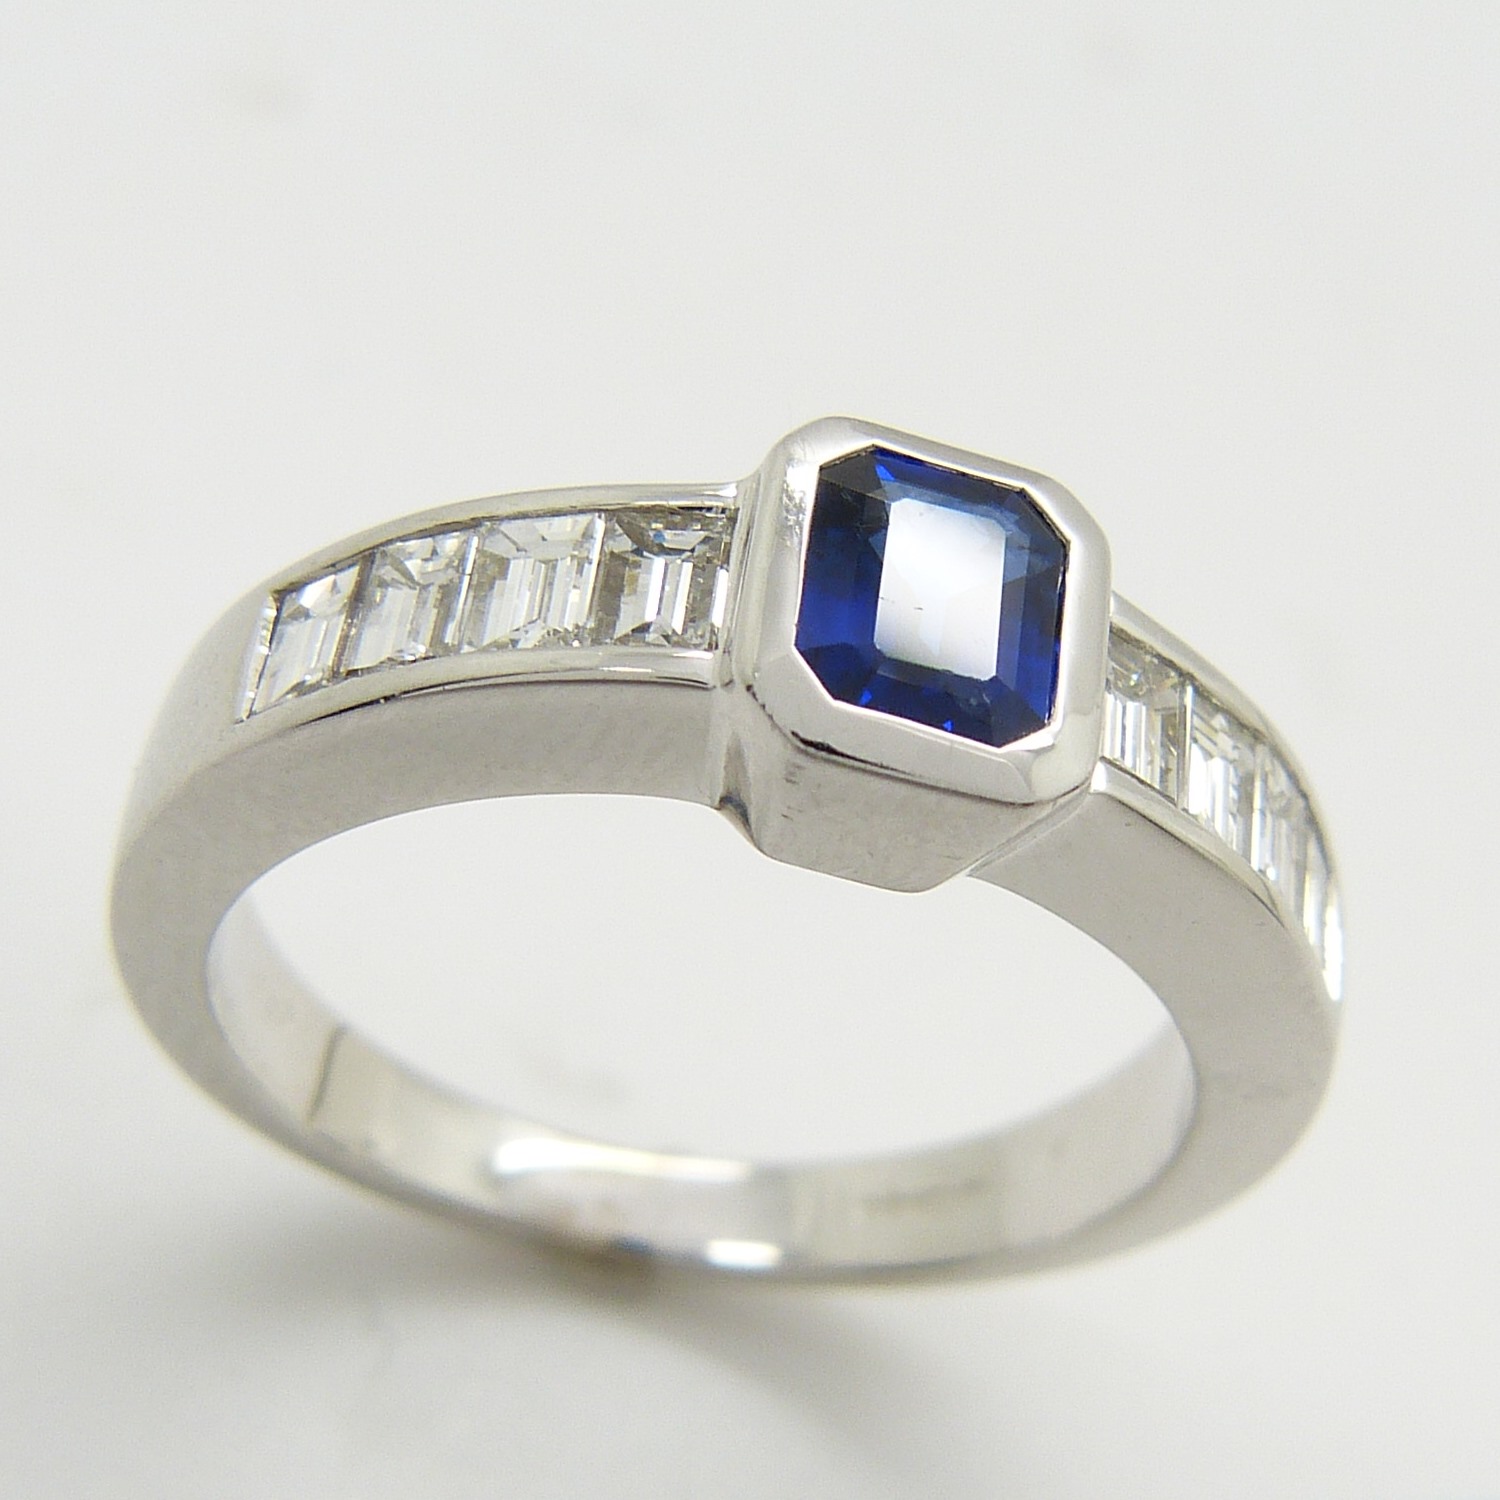 18ct white gold step-cut, sapphire and baguette-cut diamond dress ring - Image 4 of 6